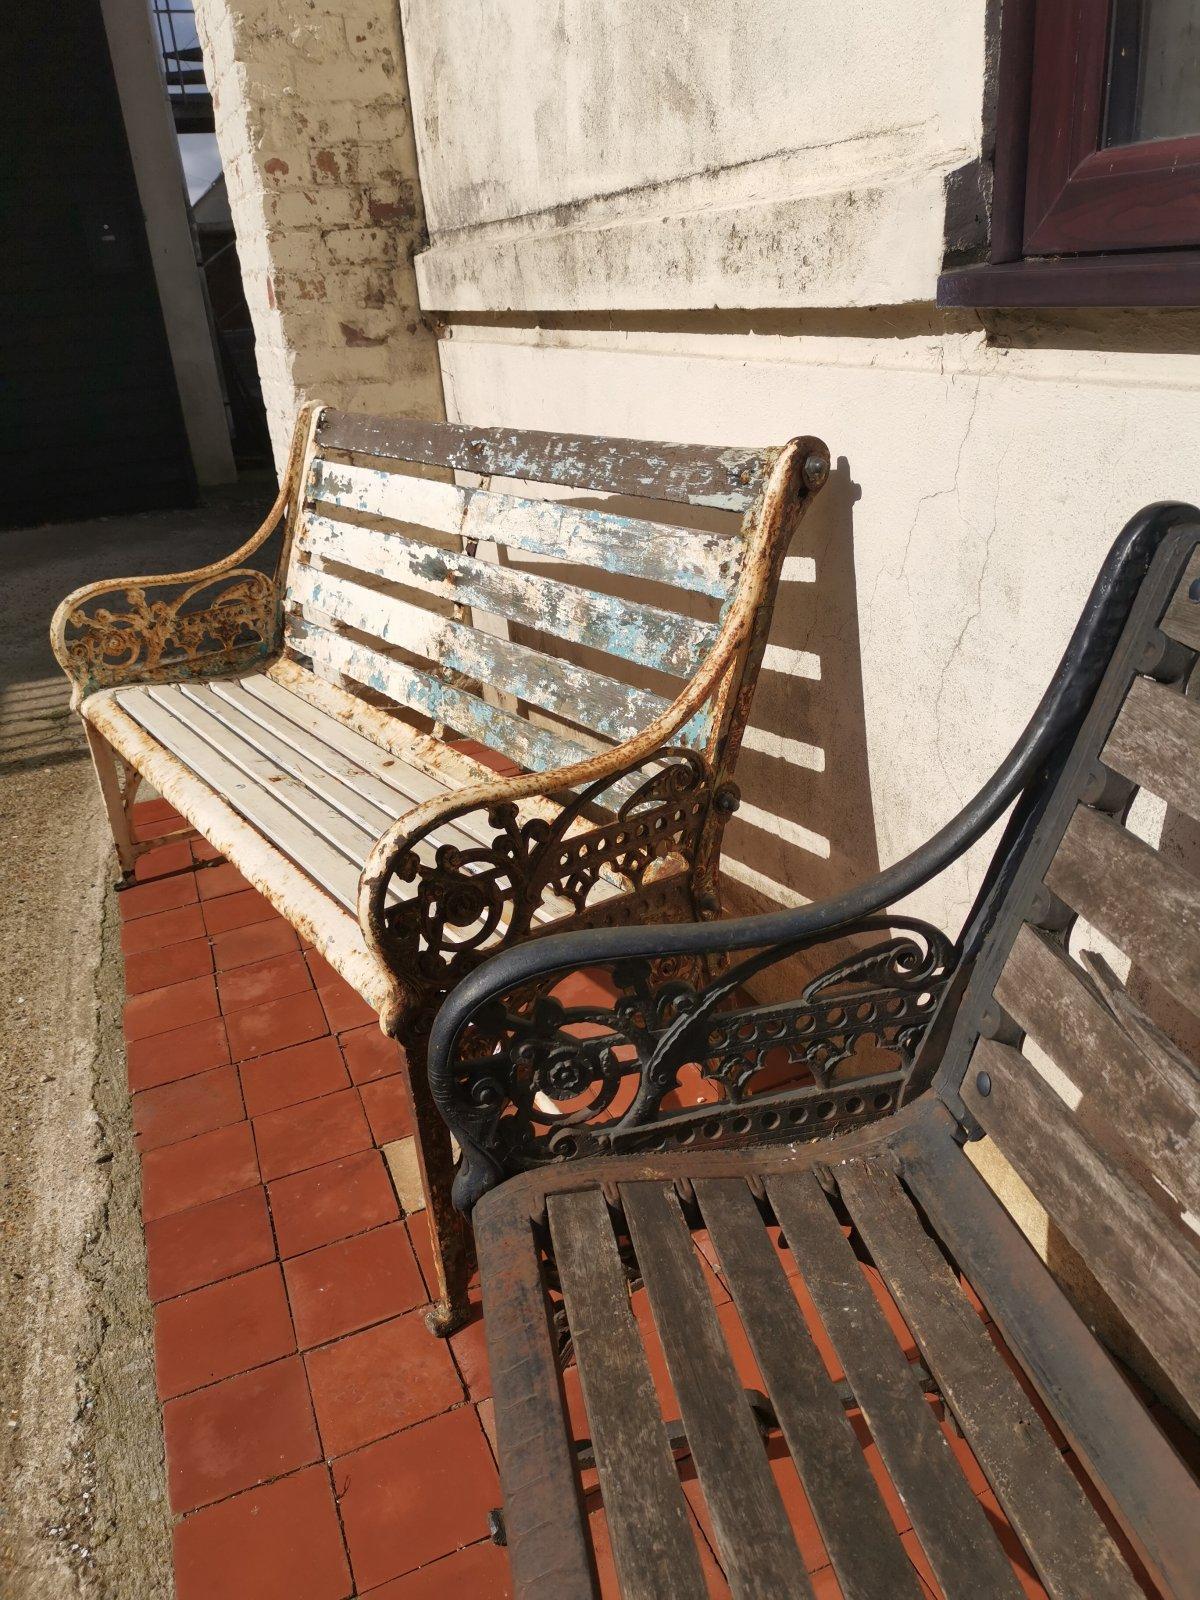 Dr C Dresser for Coalbrookdale Two ‘Medieval’ Pattern Cast Iron Garden Benches In Good Condition For Sale In London, GB